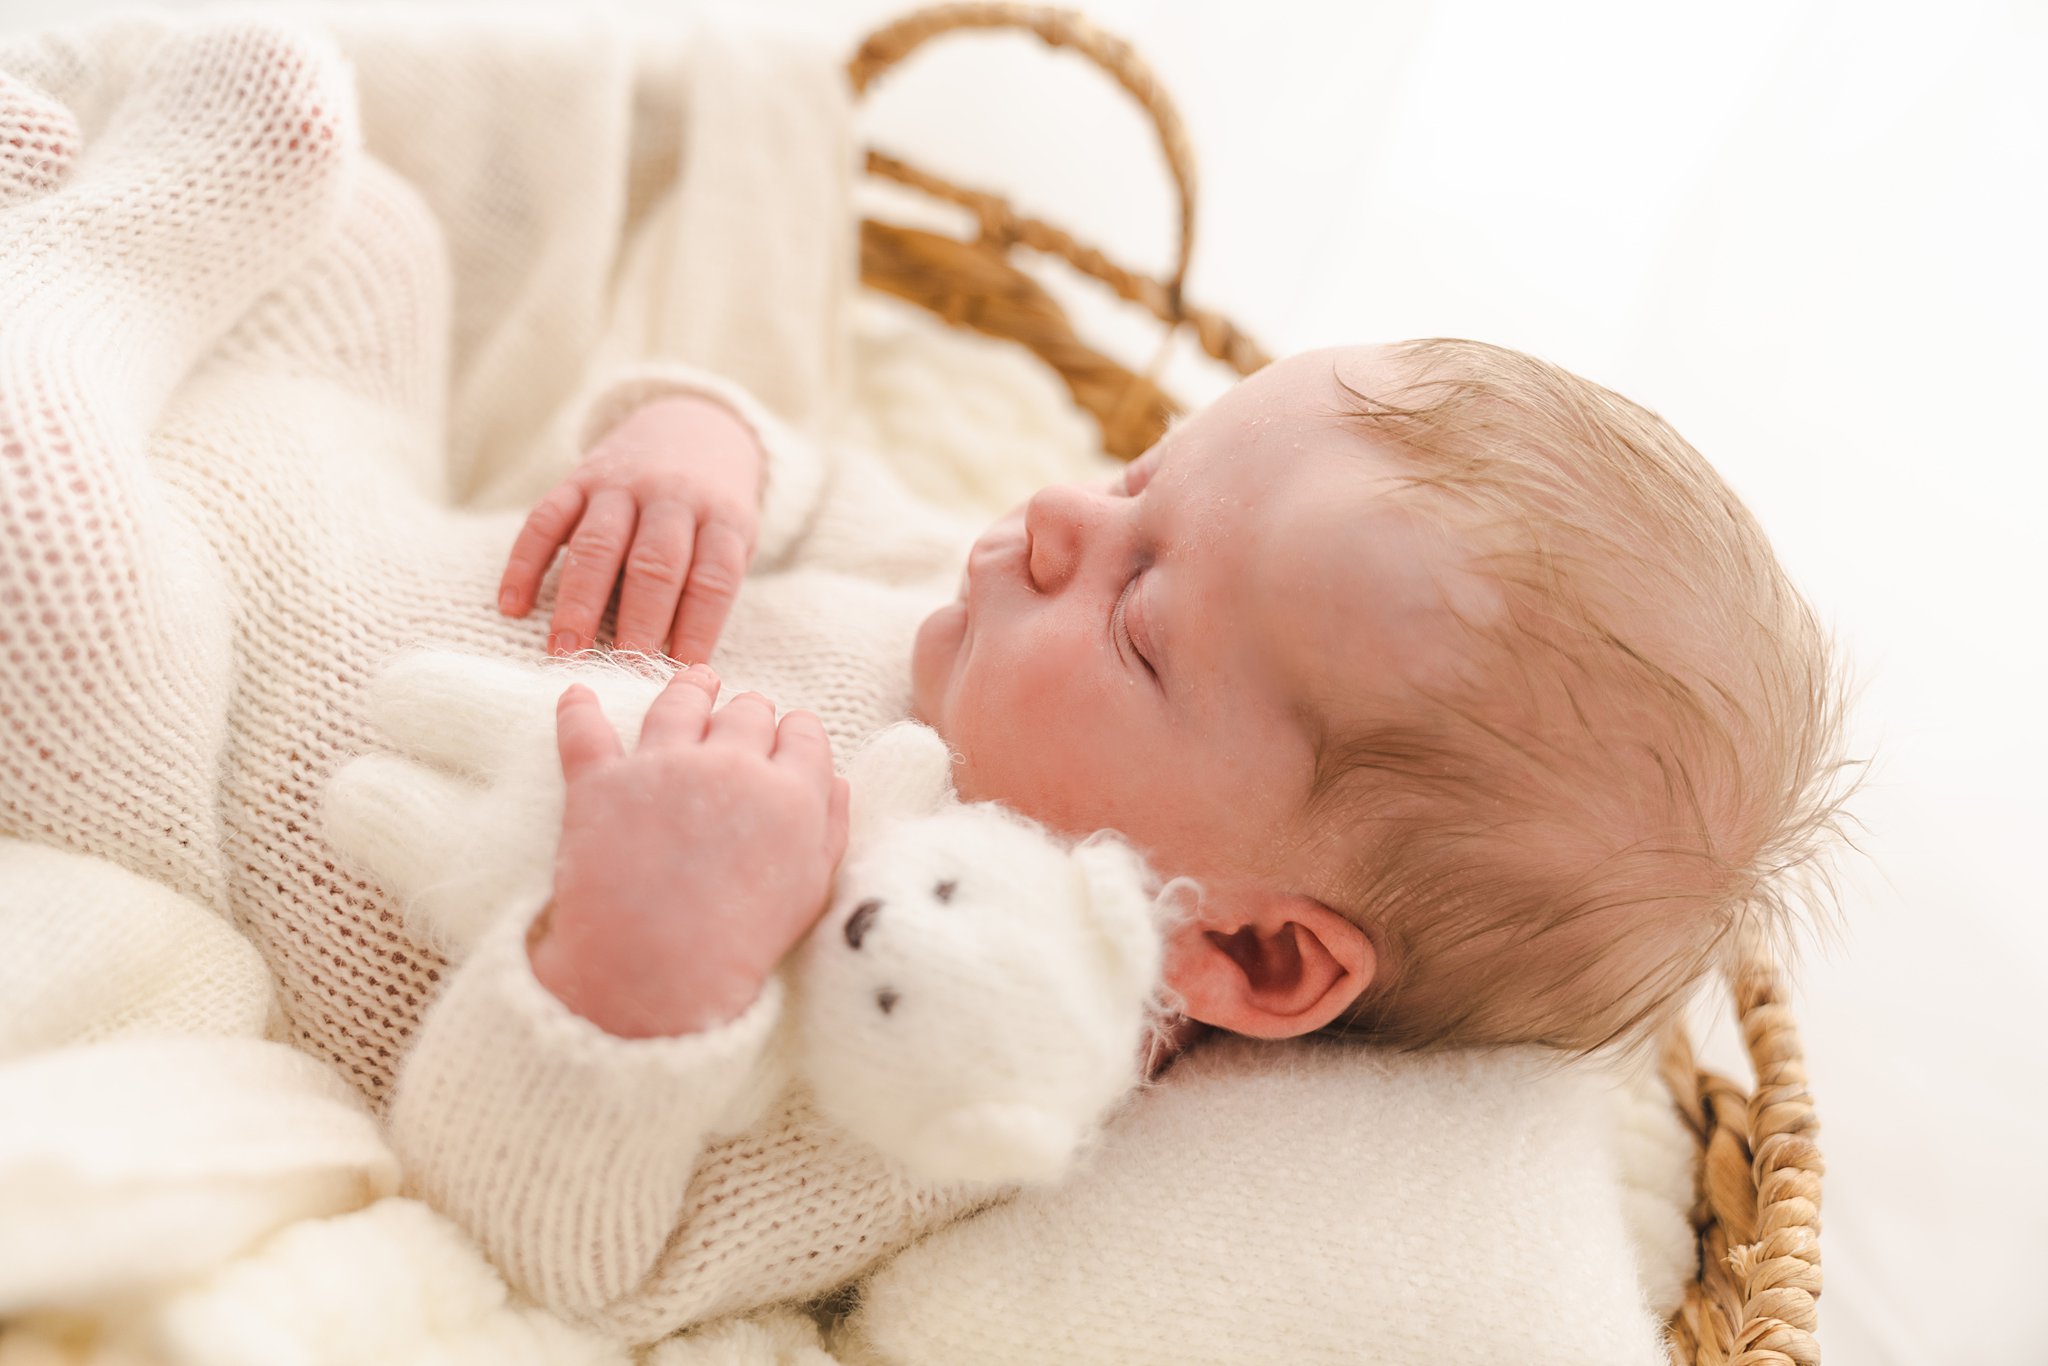 Newborn baby sleeps in a knit onesie holding a stuffed bear in a woven basket filled with pillows Welcome Baby Care